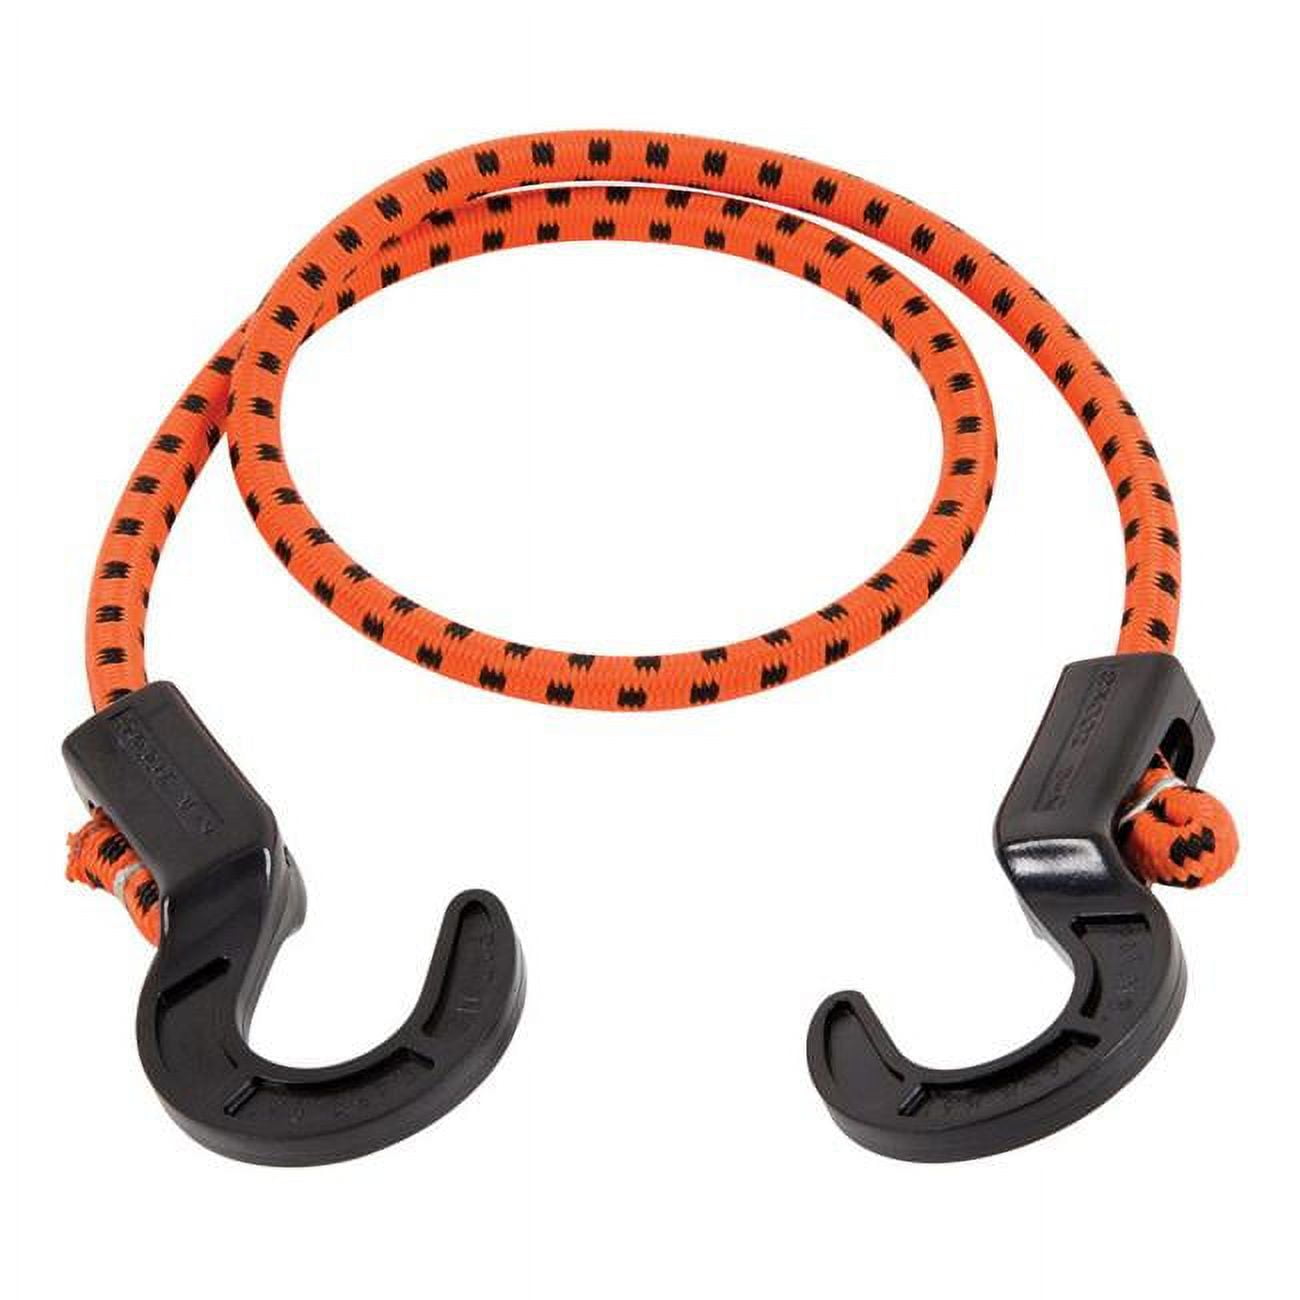 8865610 Orange Adjustable Bungee Cord, 30 X 0.315 In. - Case Of 10